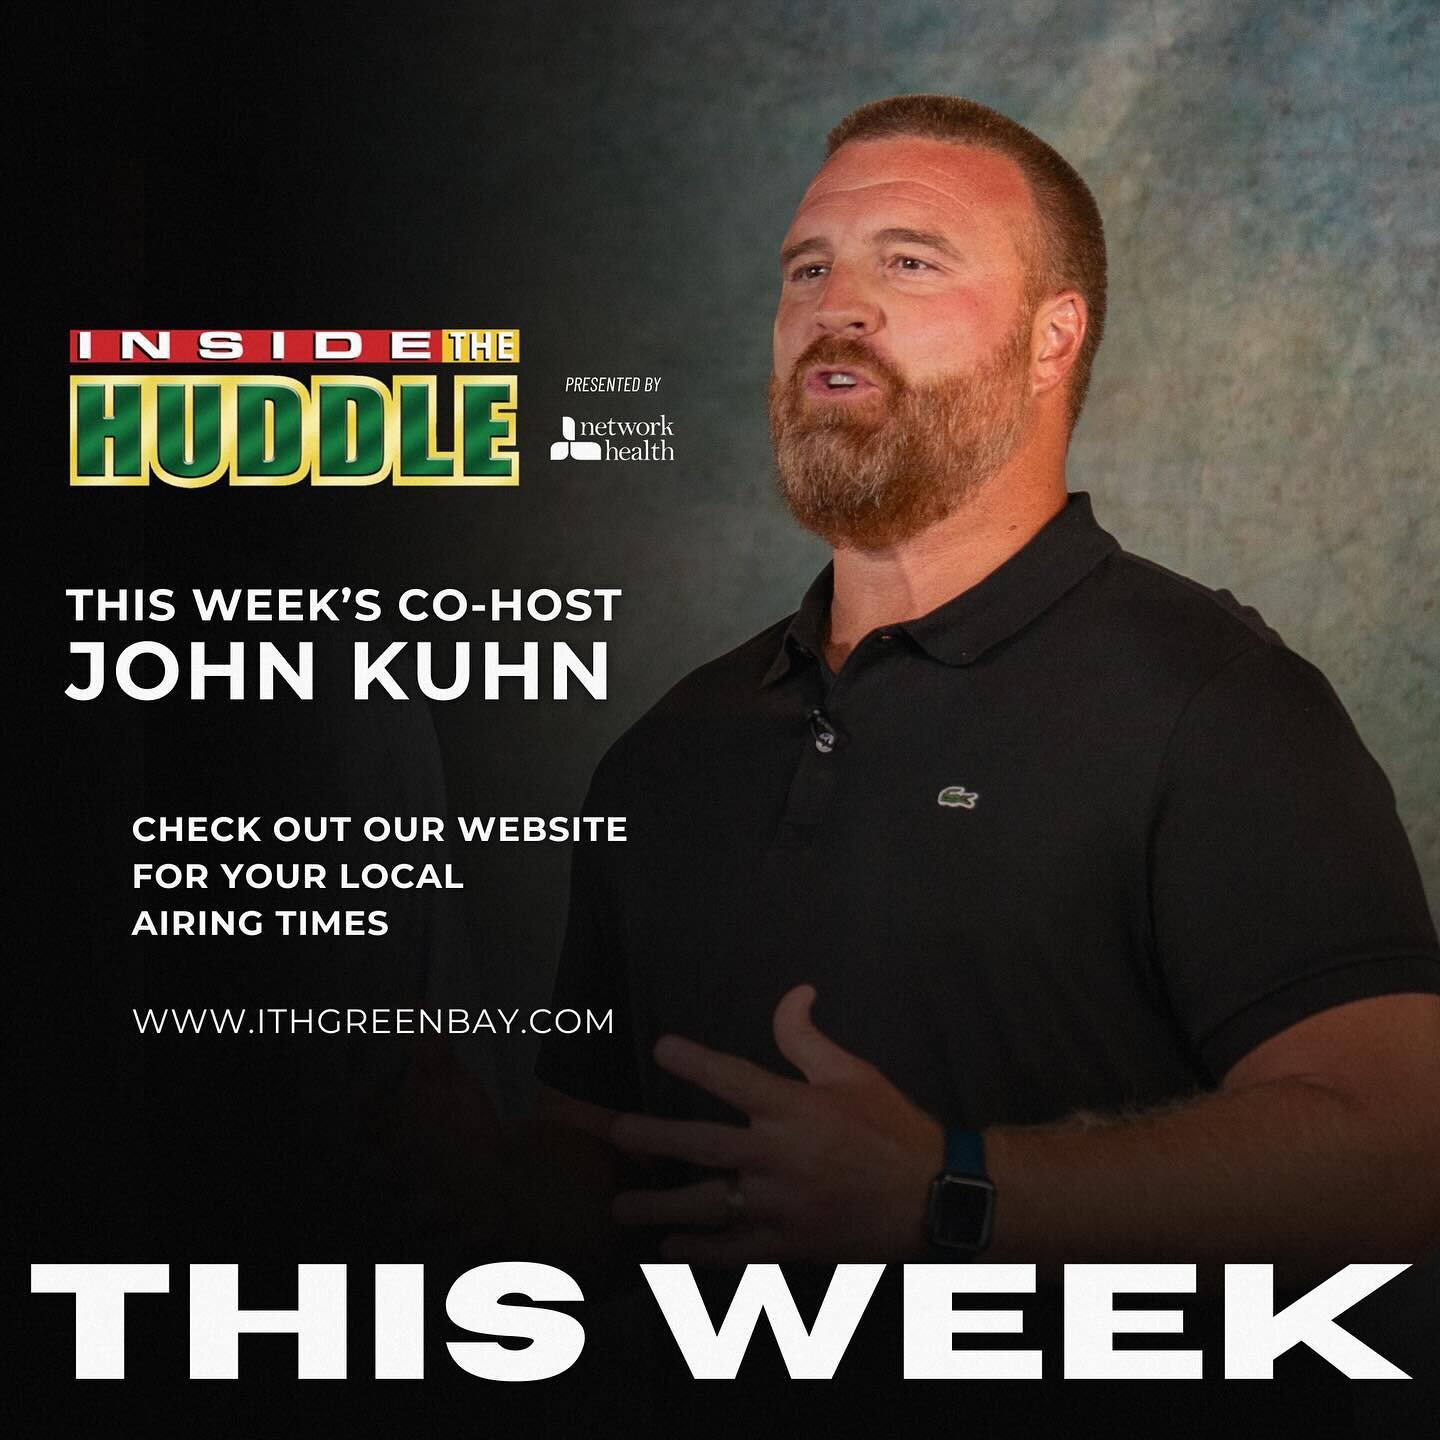 This week&rsquo;s show with John Kuhn is filmed in the studio. Make sure to check out our website, or our pinned post, to see your local air times 📺

We will be back at @thebarholmgrenway for a LIVE show next Tuesday, the 26th, with Romeo Doubs 🔥